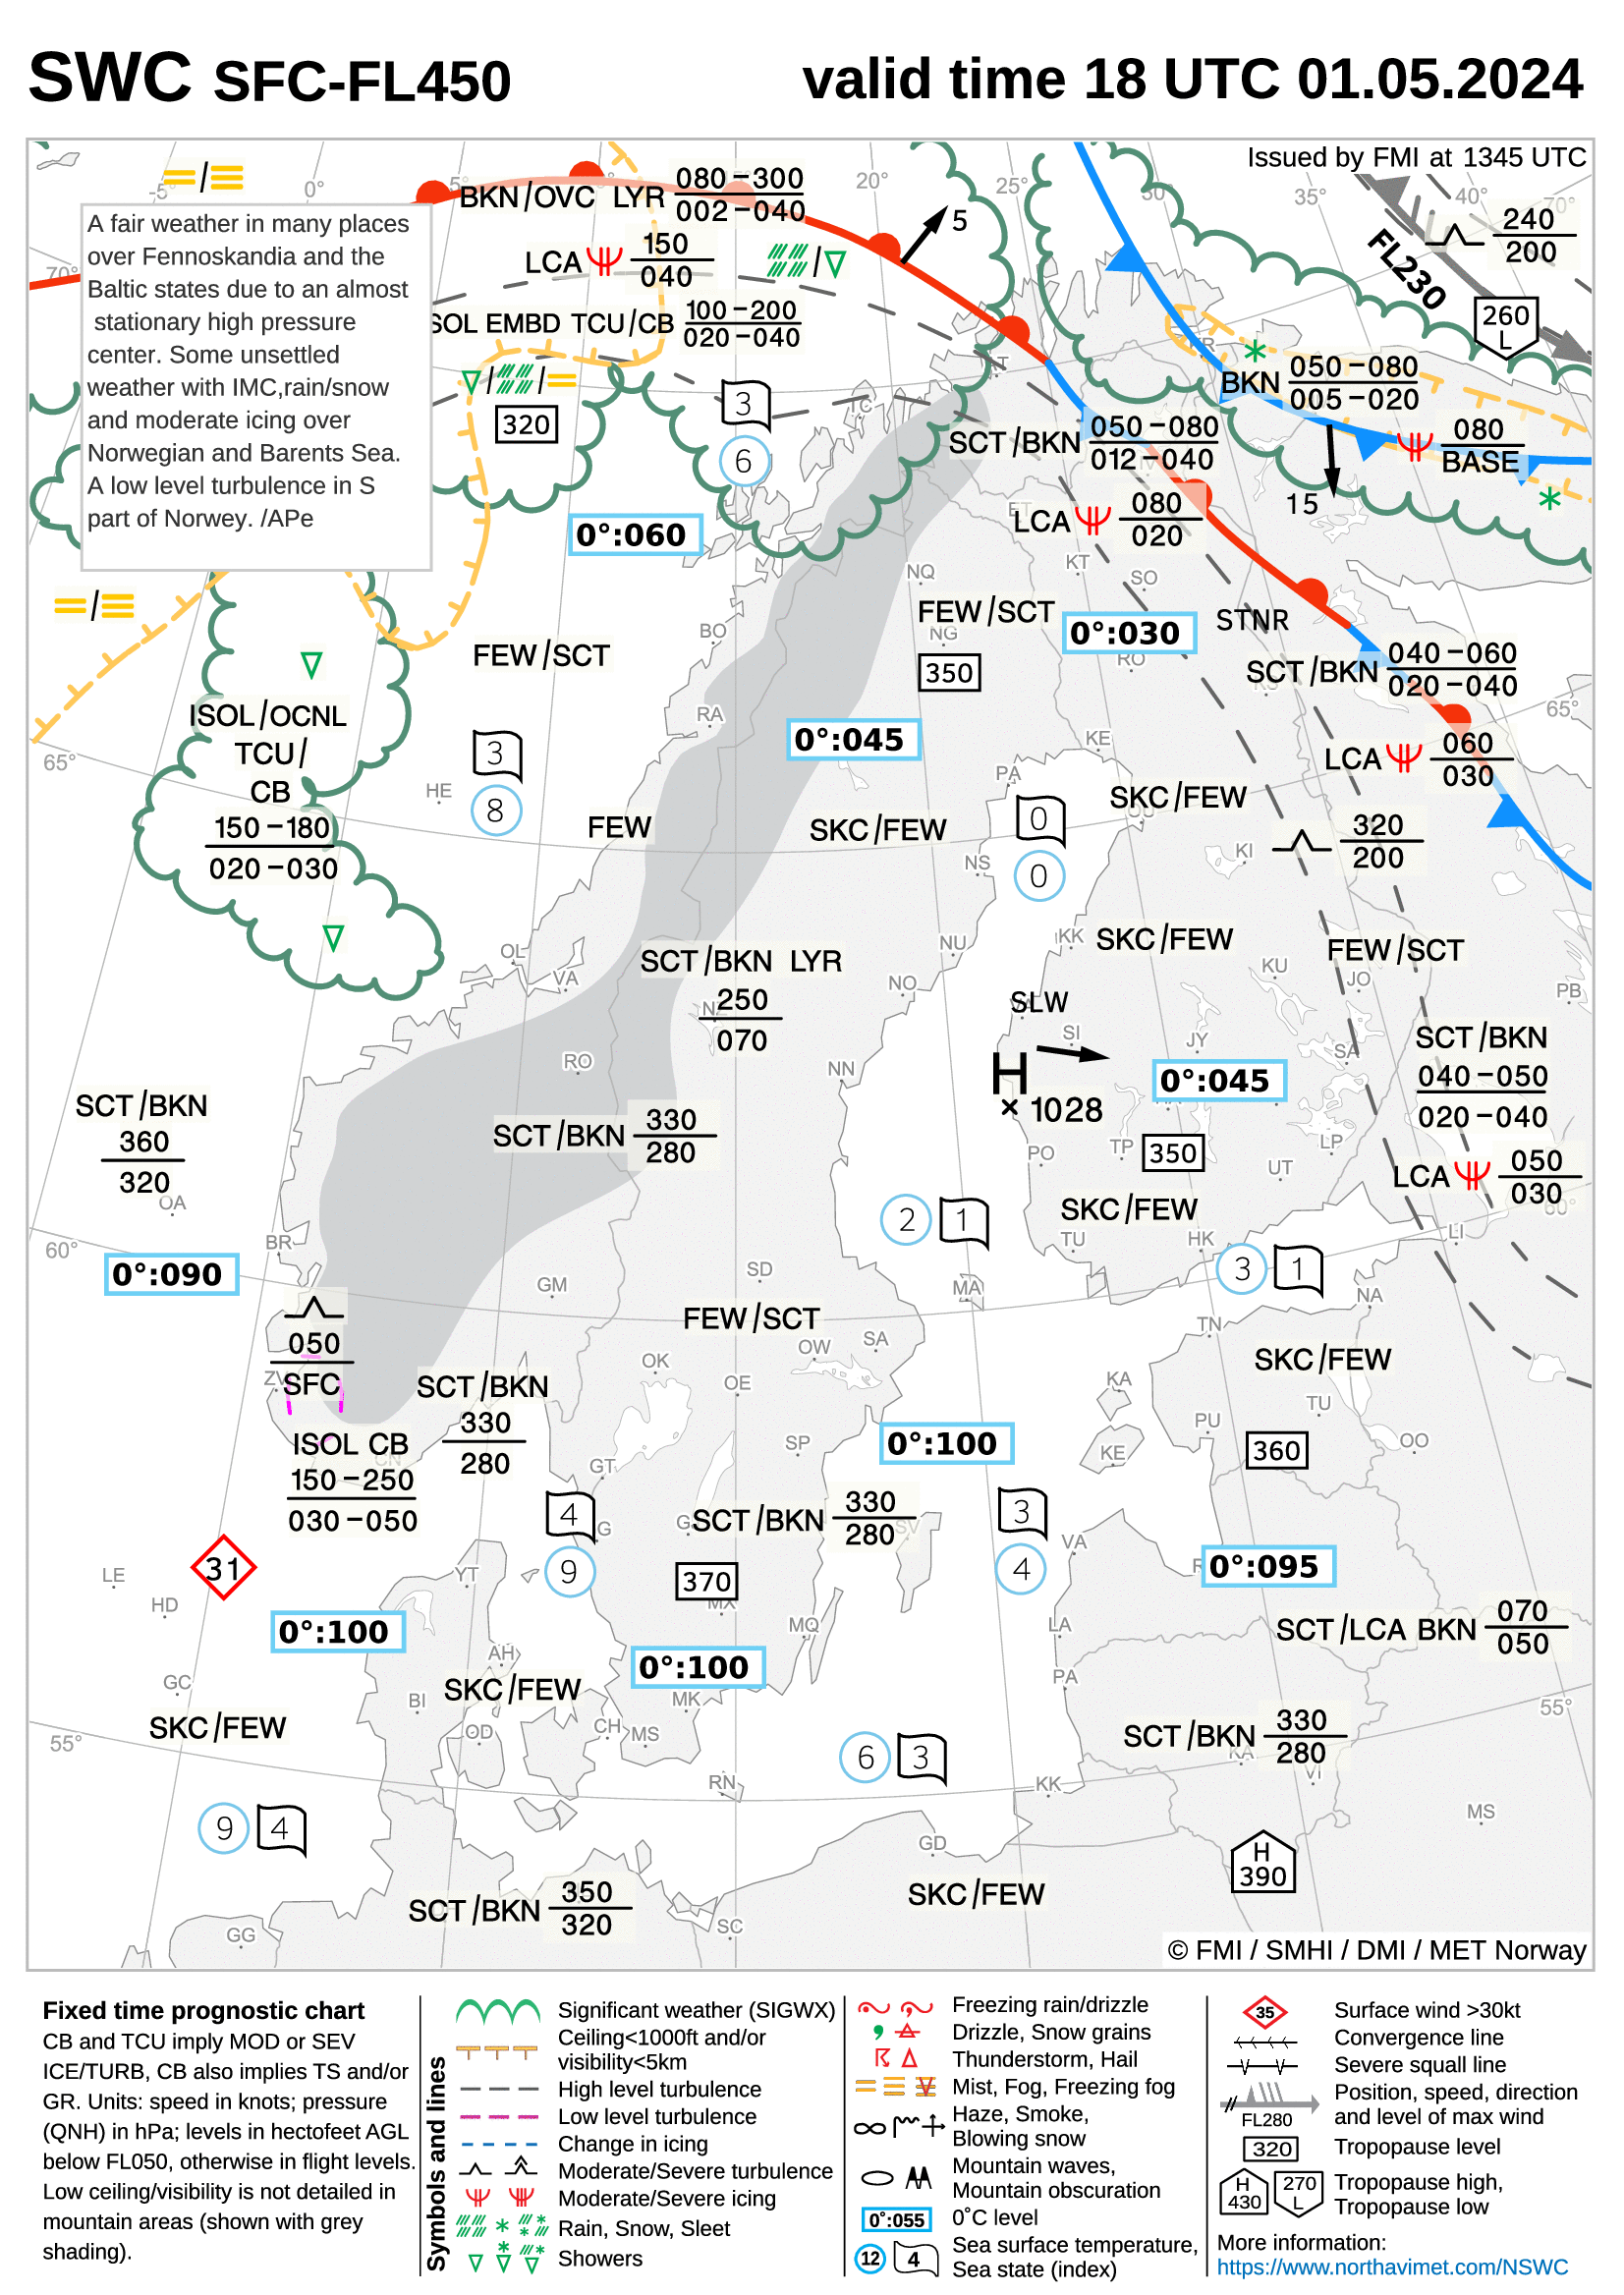 Significant Weather Chart for Scandinavia